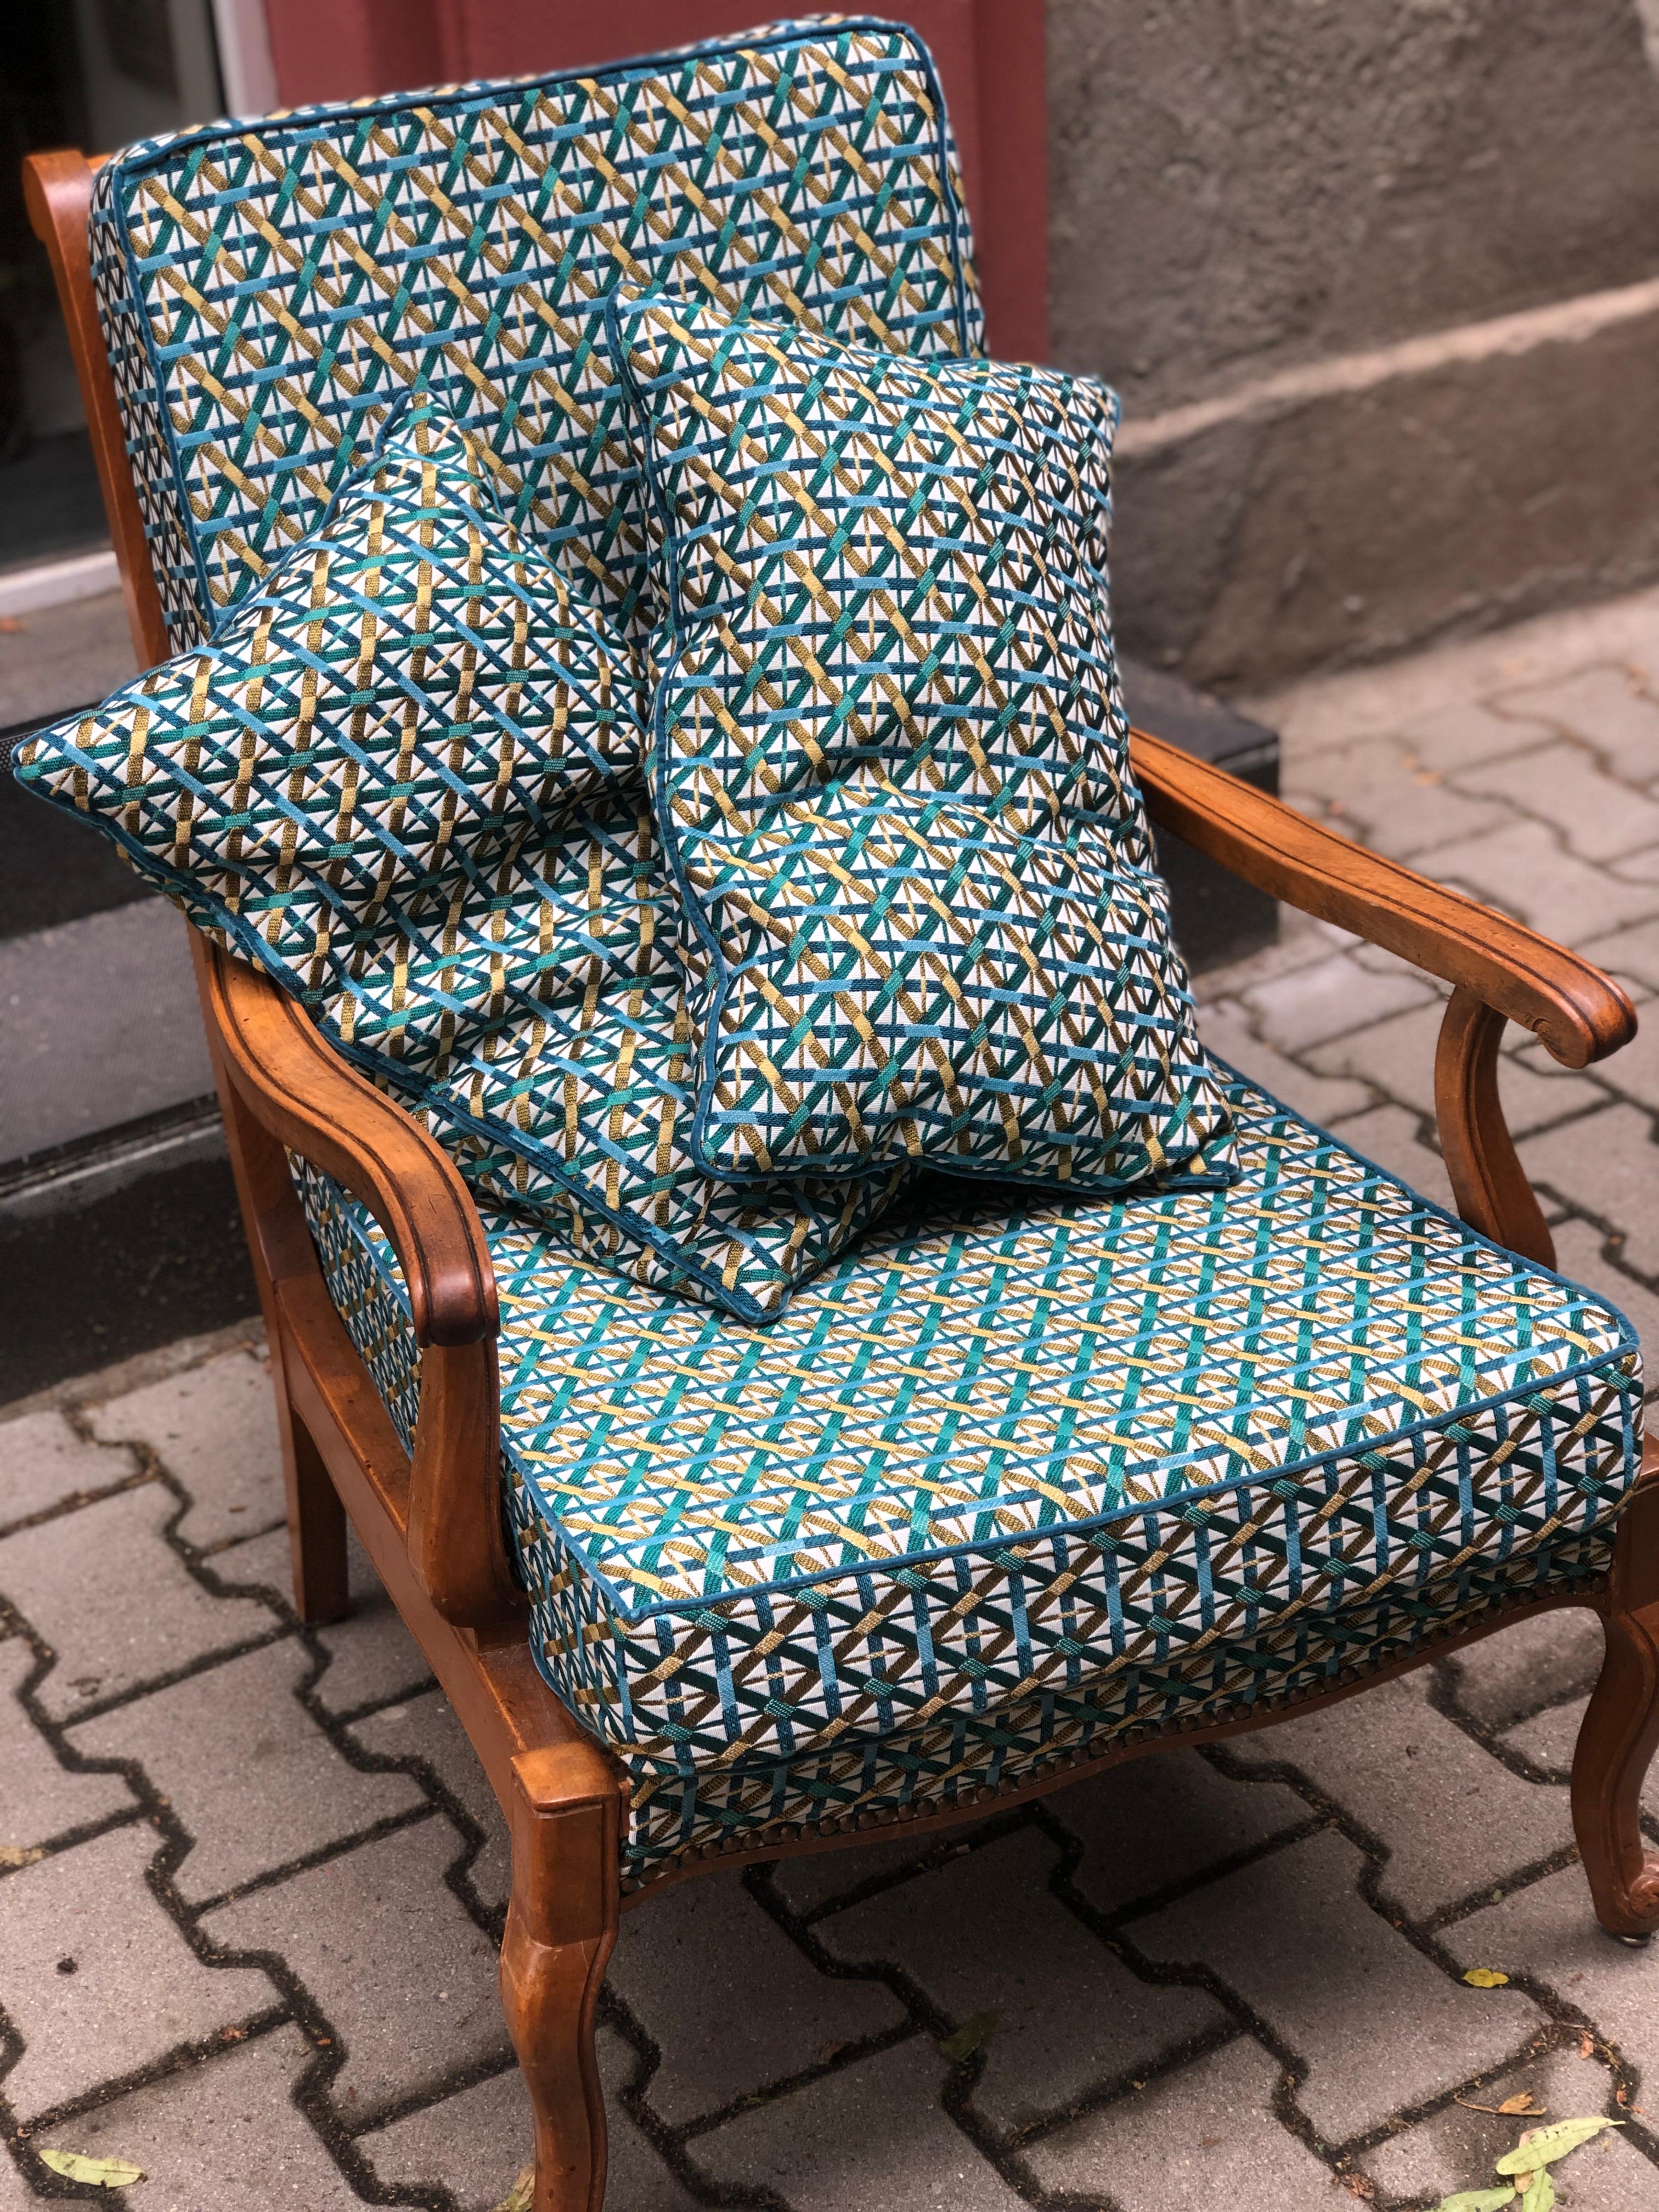 Middle 20th century French cozy armchair in very good condition without any restorations of the frame. There are metal springs at the bottom and at the back too which makes it very comfortable. Brand new upholstery in bright colours.
France, circa